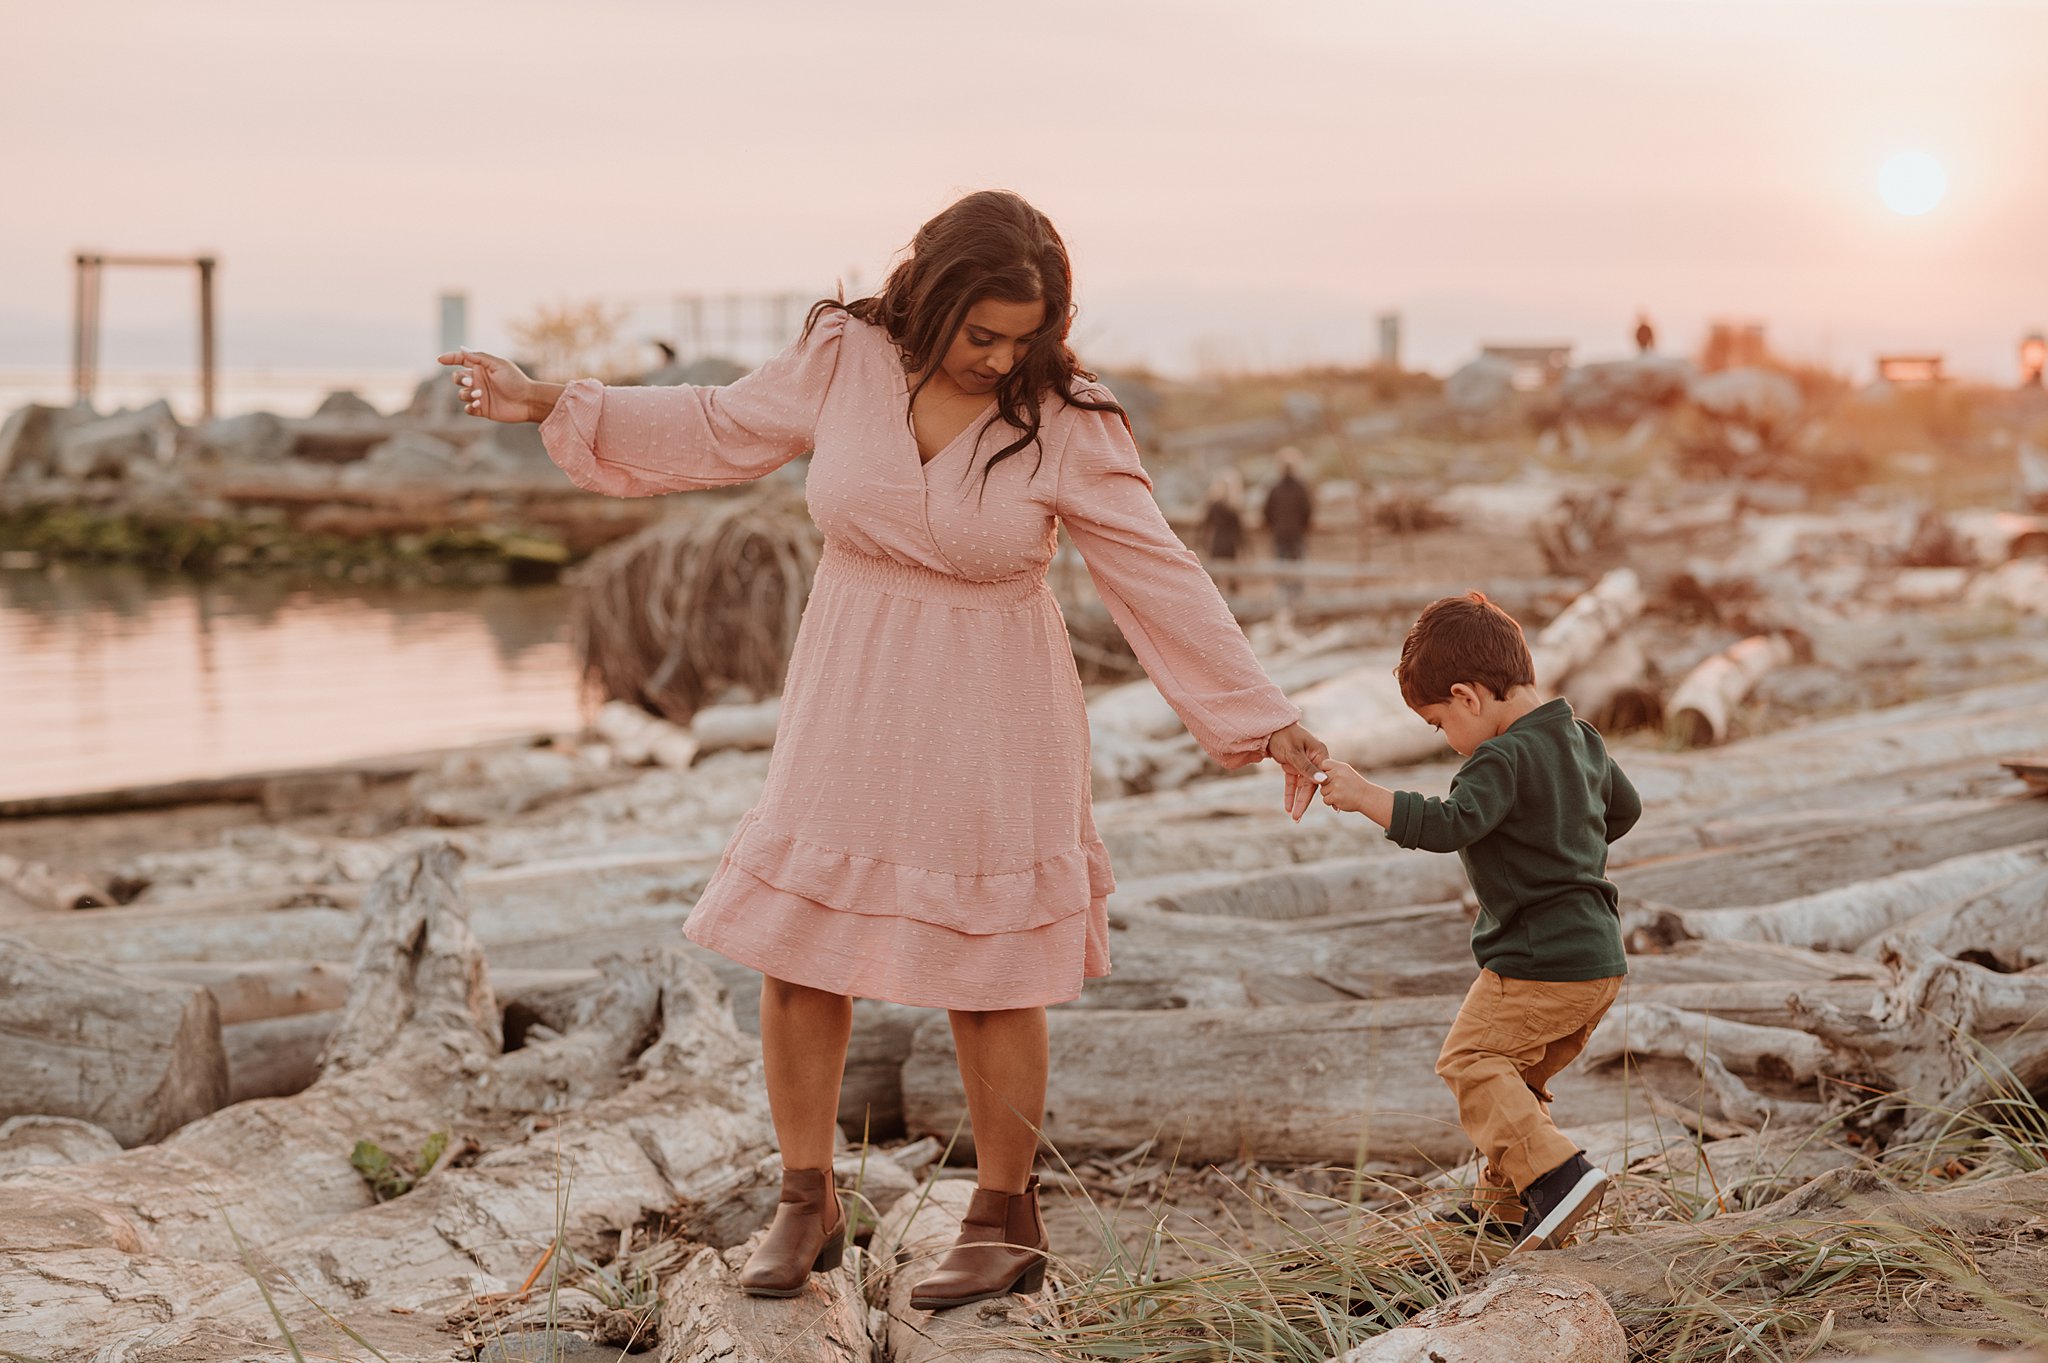 A mother in a pink dress walks her toddler son over some driftwood on a beach at sunset after some vancouver swim lessons